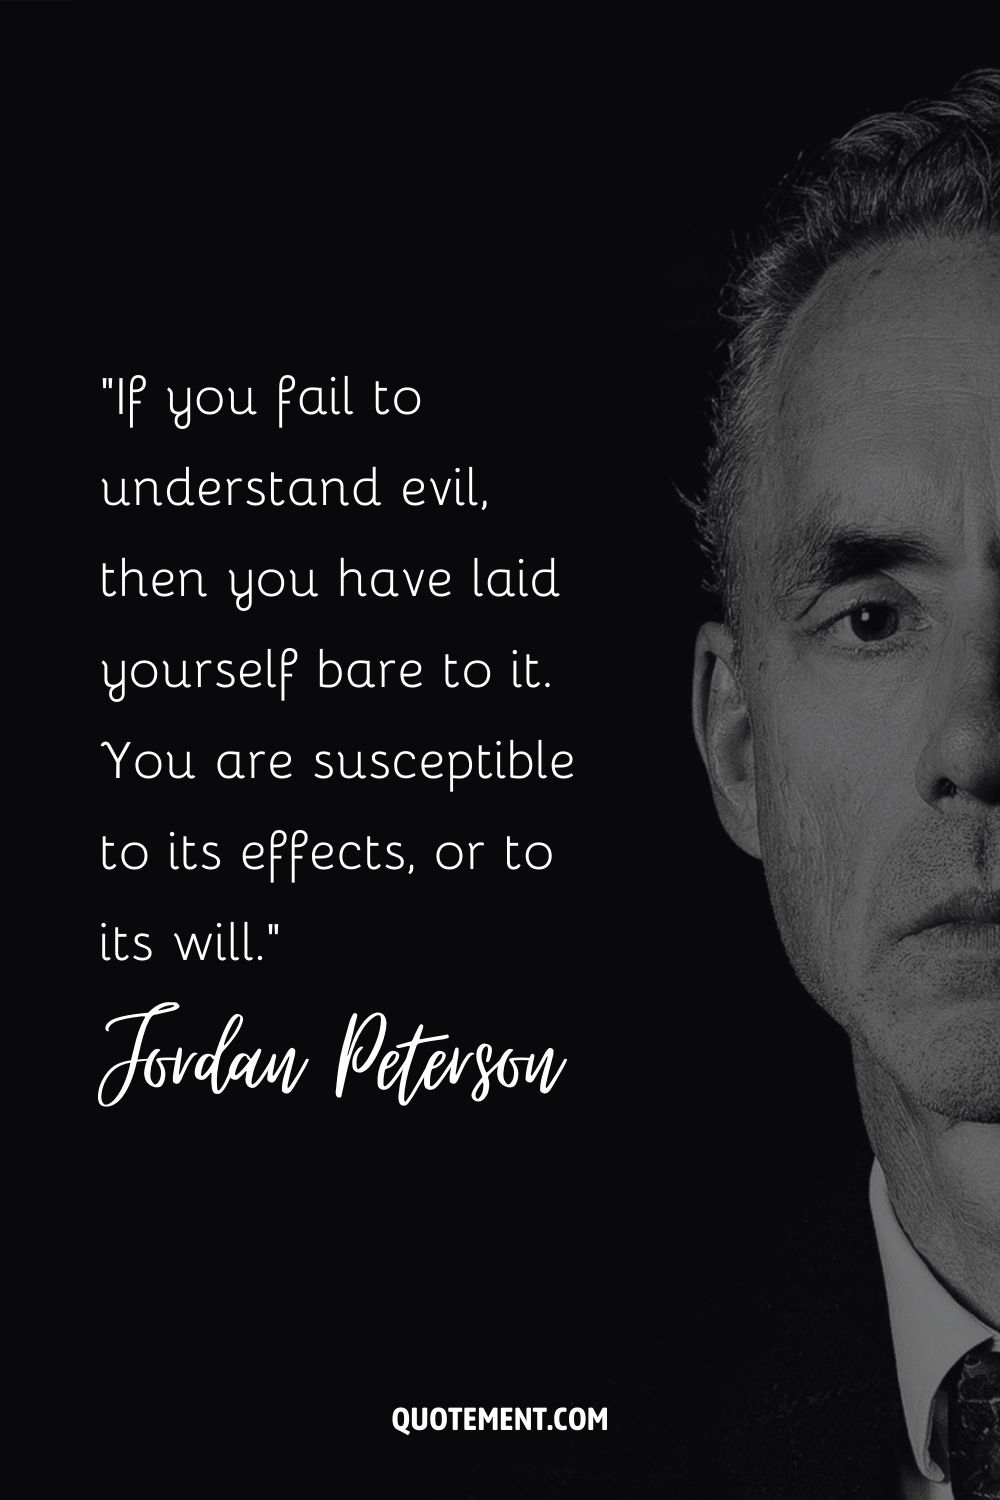 If you fail to understand evil, then you have laid yourself bare to it. You are susceptible to its effects, or to its will